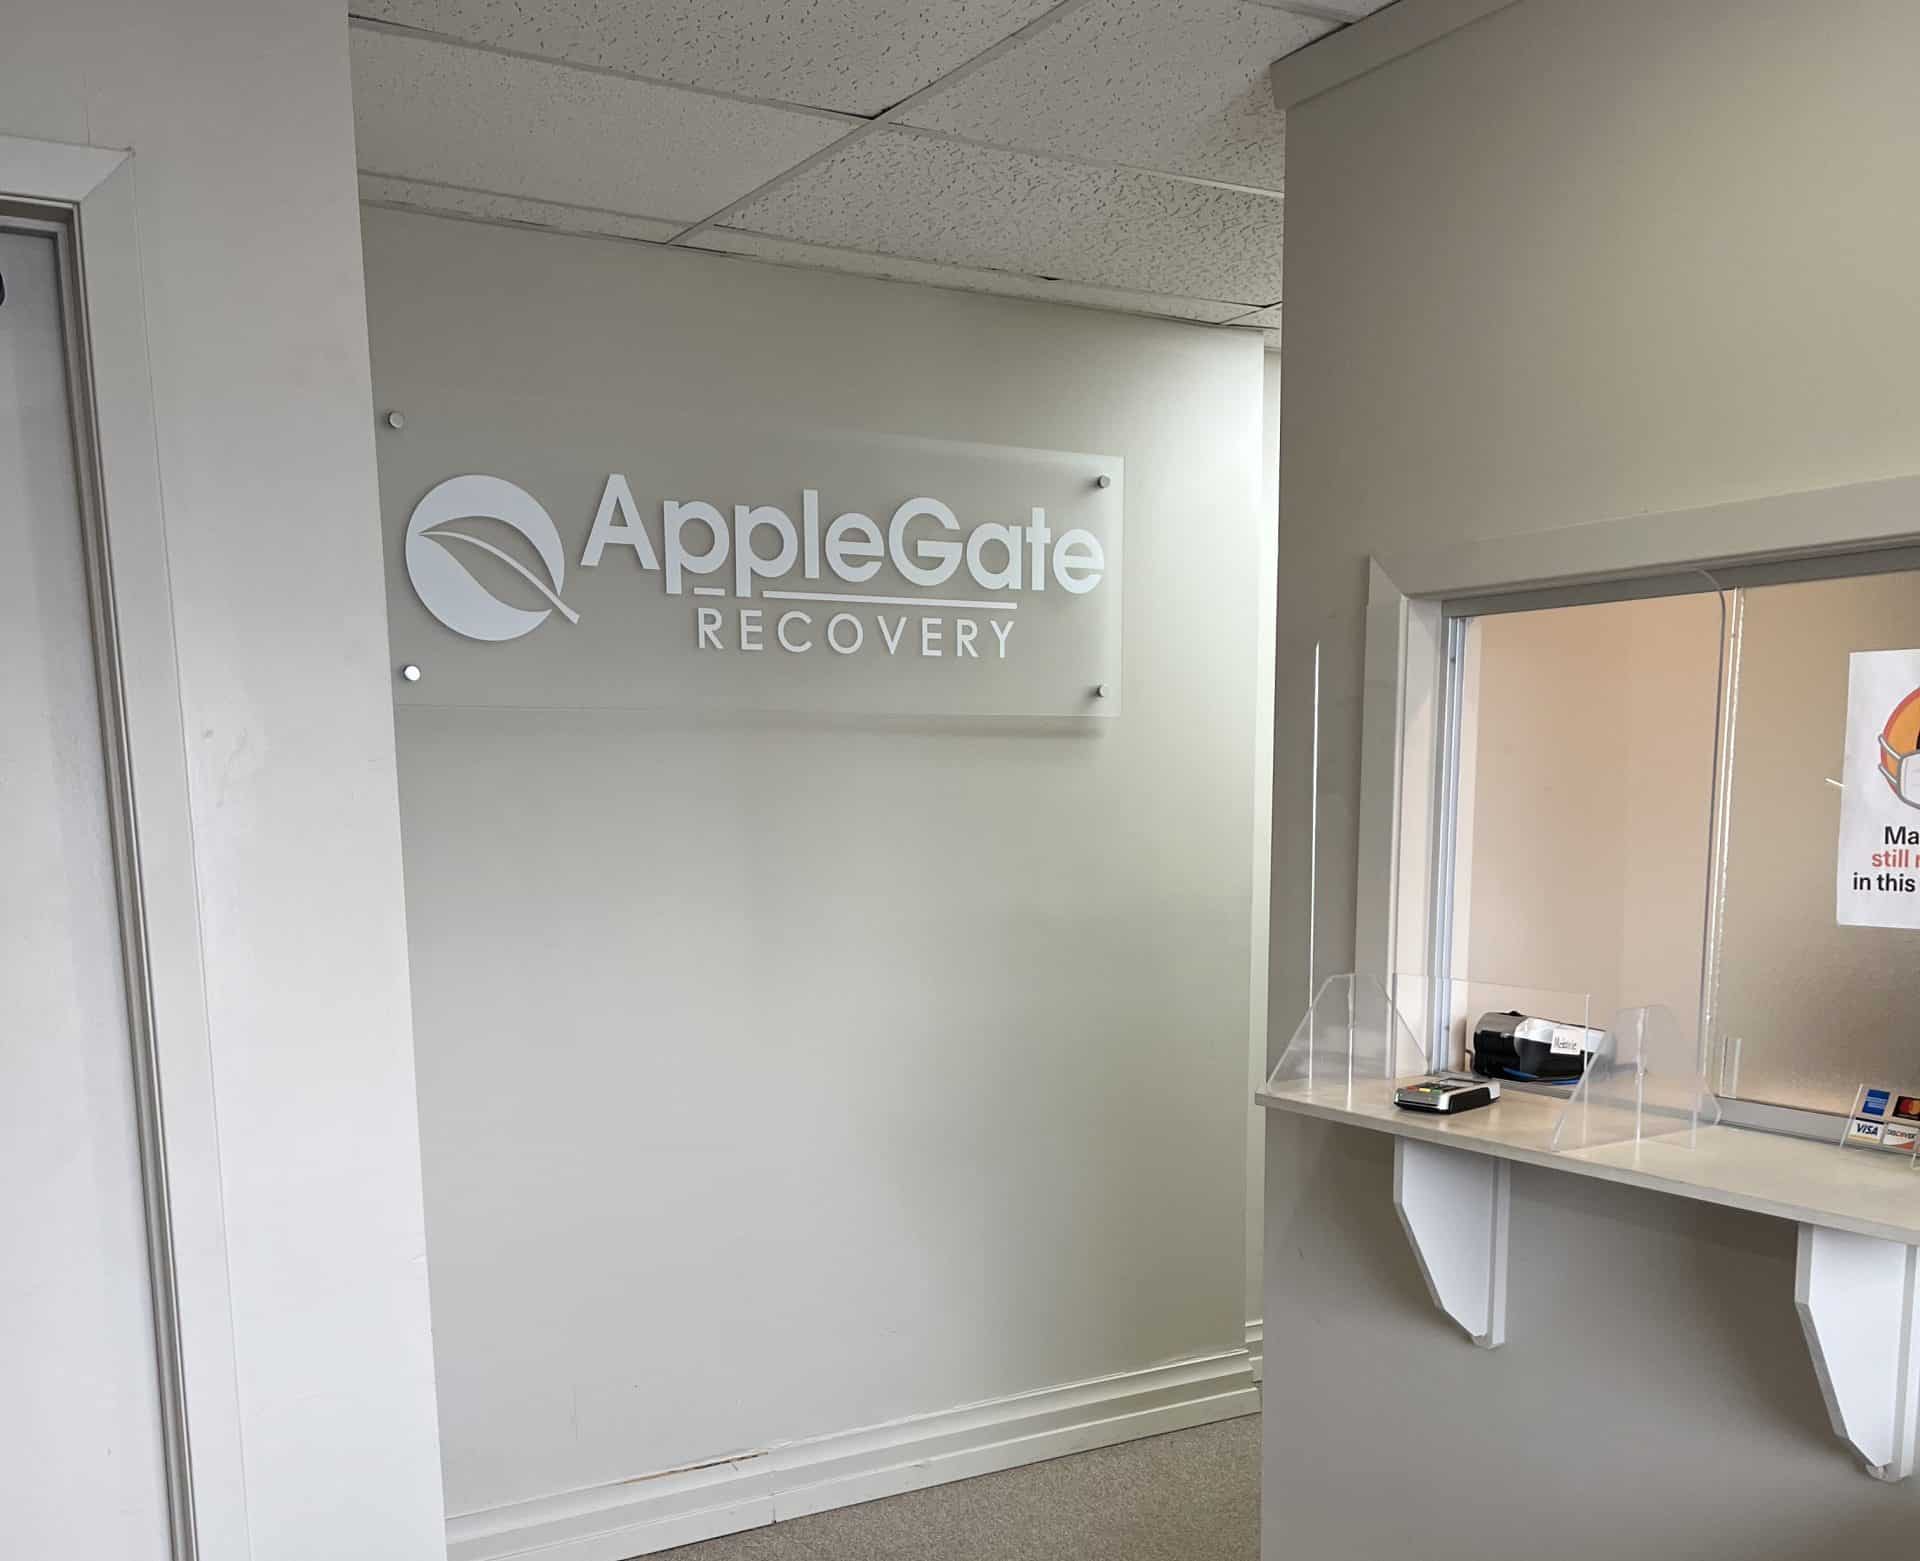 AppleGate Recovery check-in desk in Metairie, LA